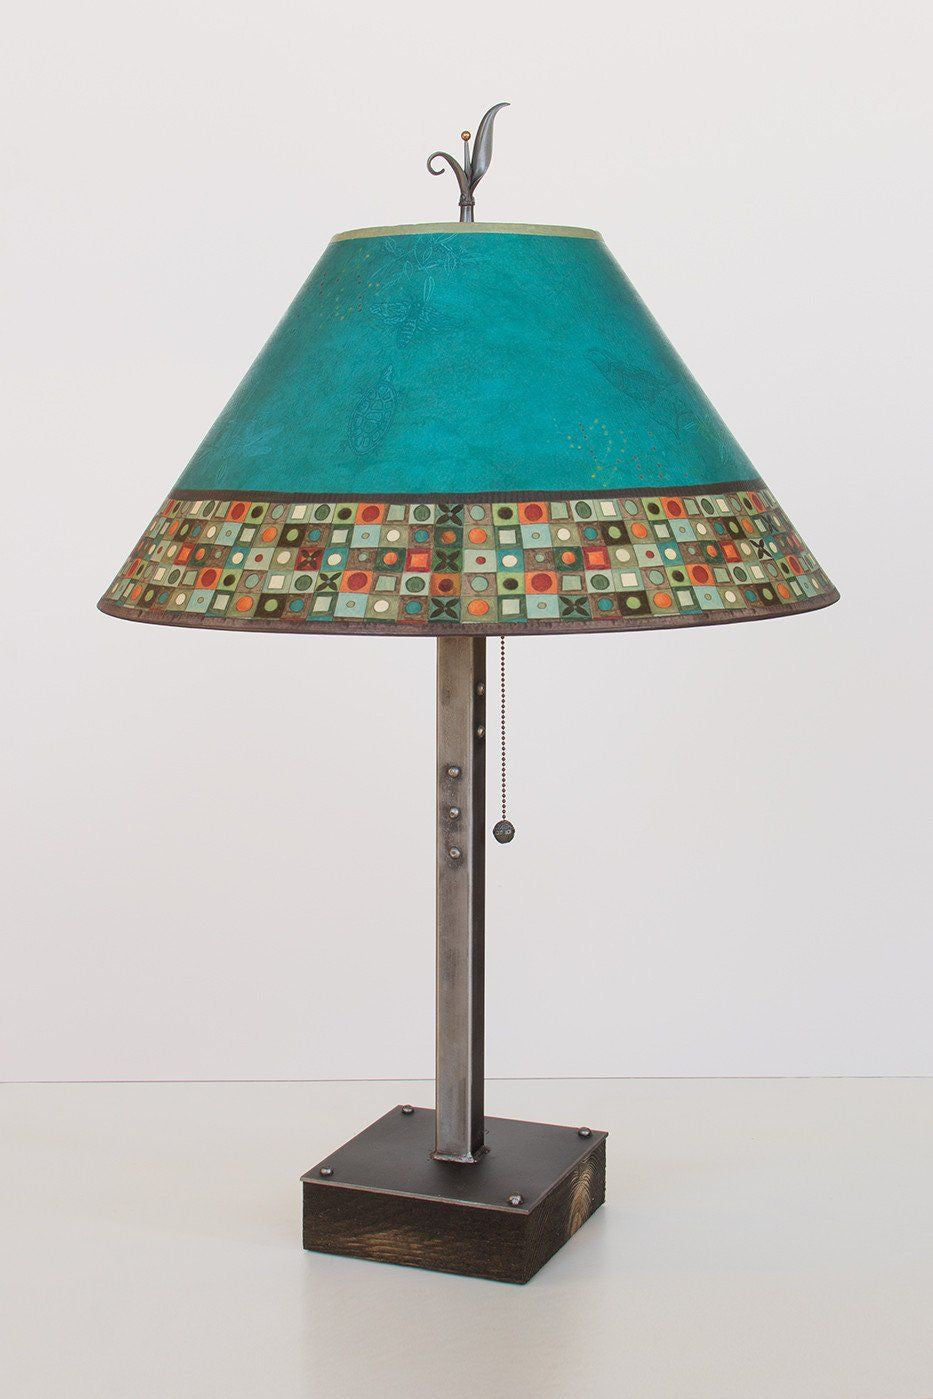 Janna Ugone &amp; Co Table Lamps Steel Table Lamp on Wood with Large Conical Shade in Jade Mosaic